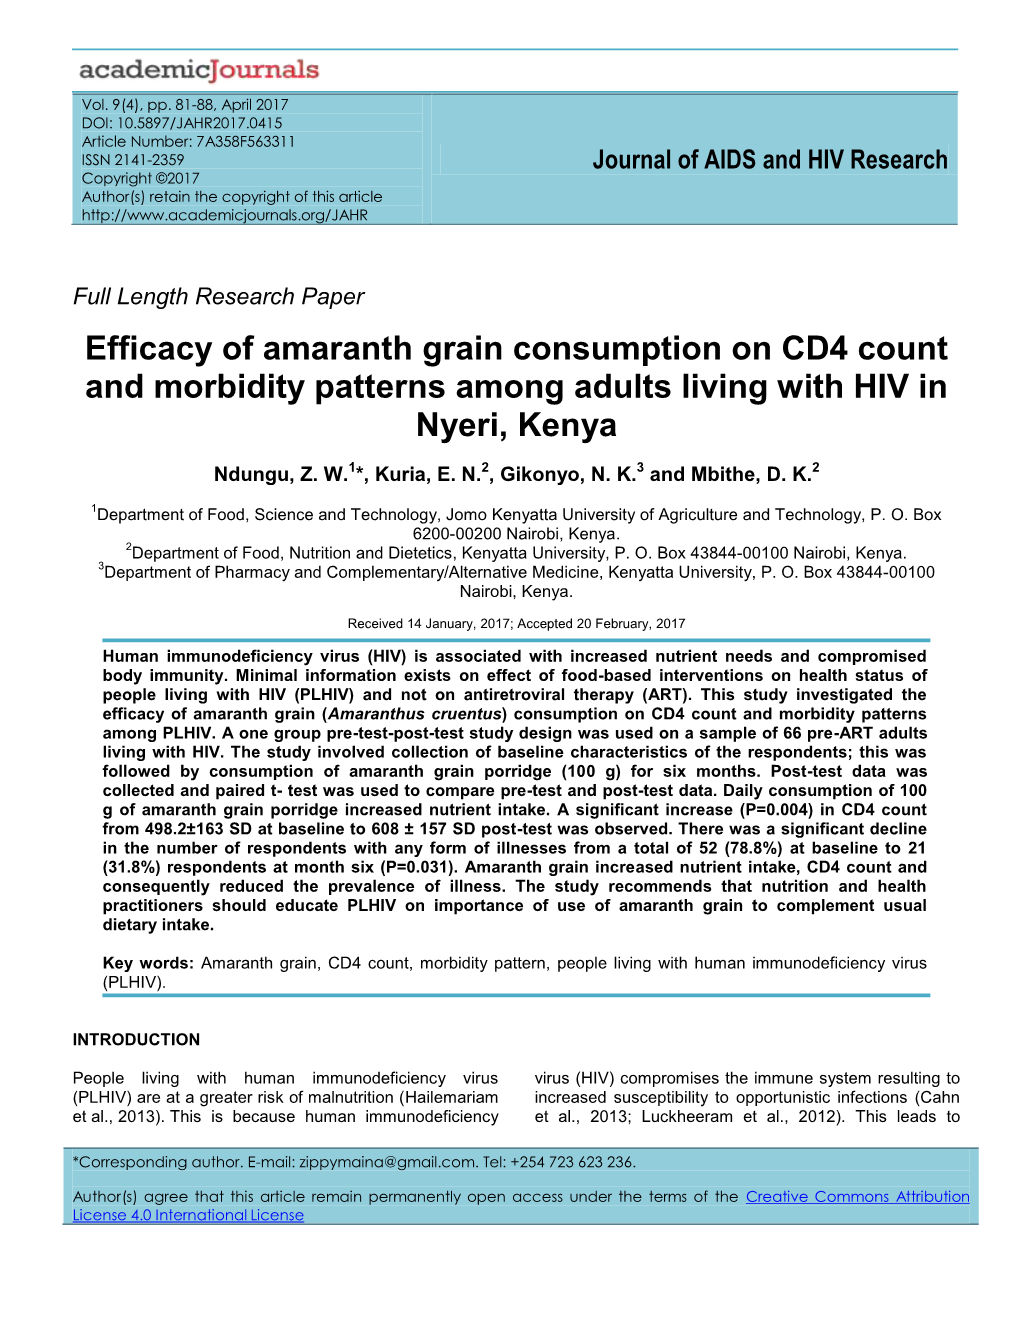 Efficacy of Amaranth Grain Consumption on CD4 Count and Morbidity Patterns Among Adults Living with HIV in Nyeri, Kenya